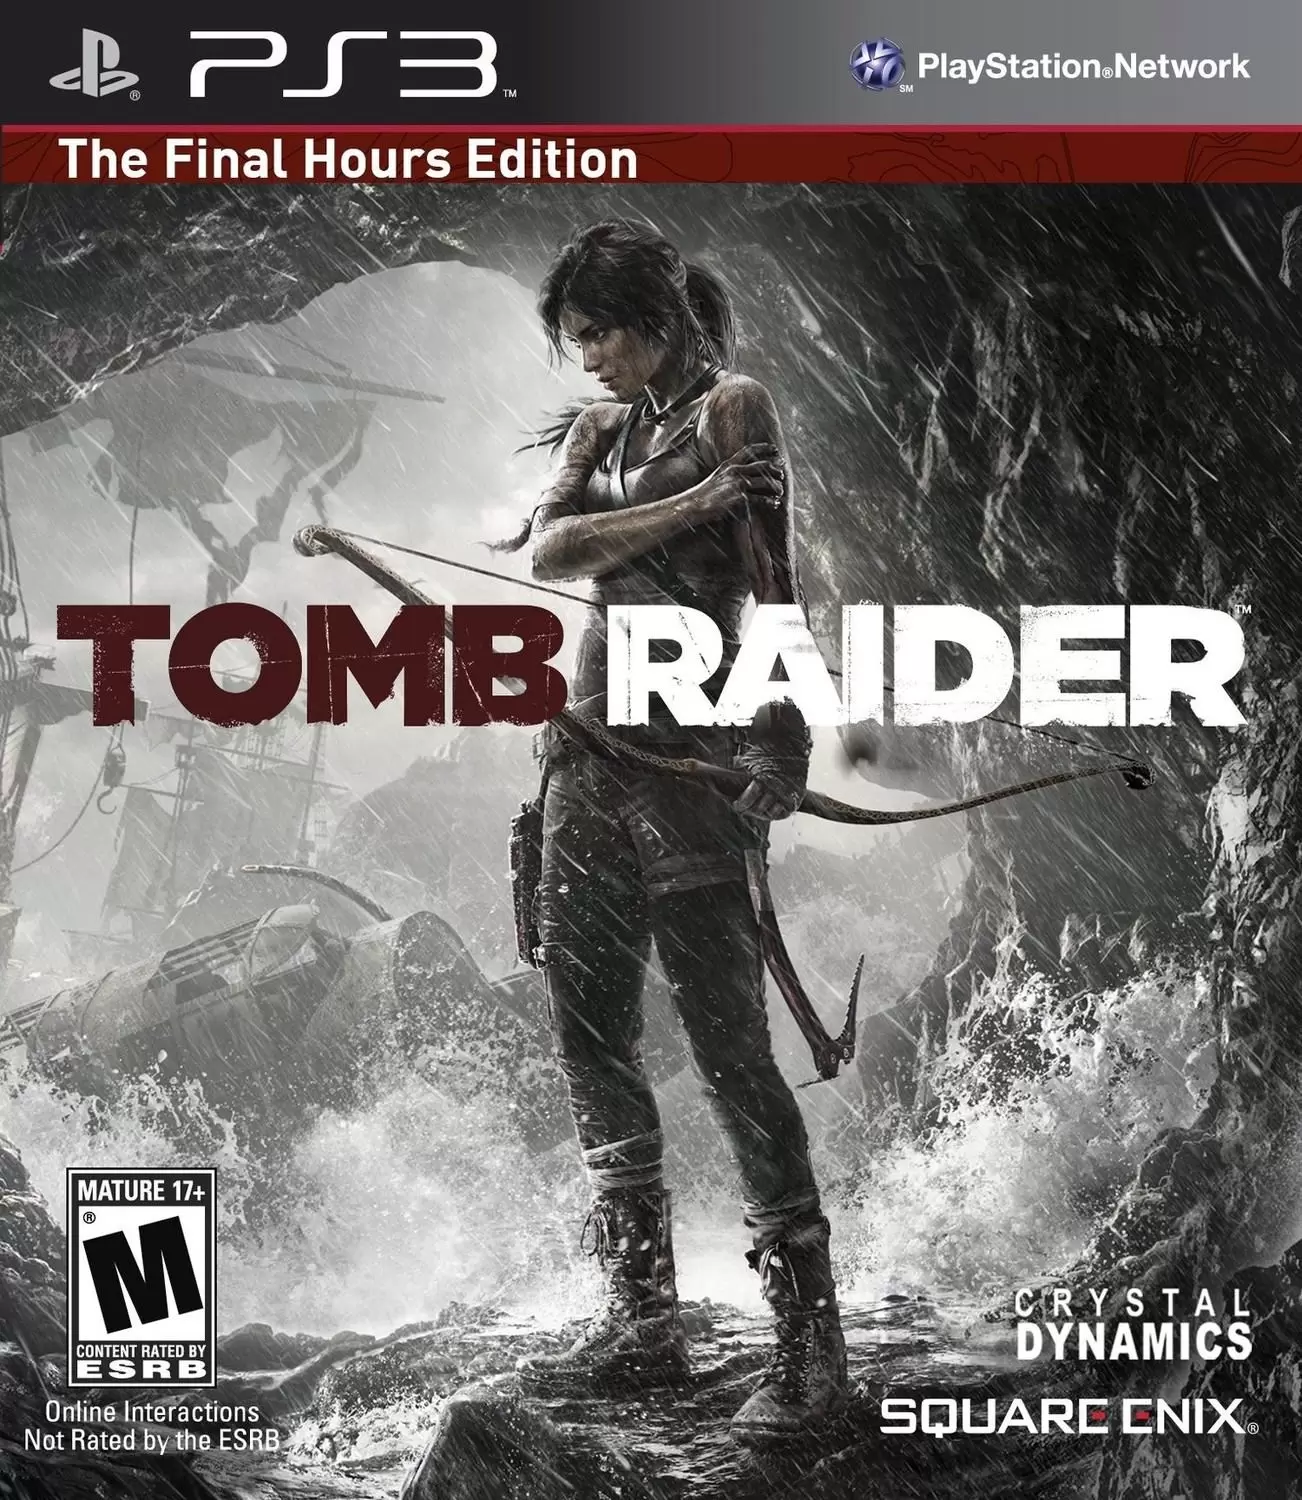 PS3 Games - Tomb Raider: The Final Hours Edition